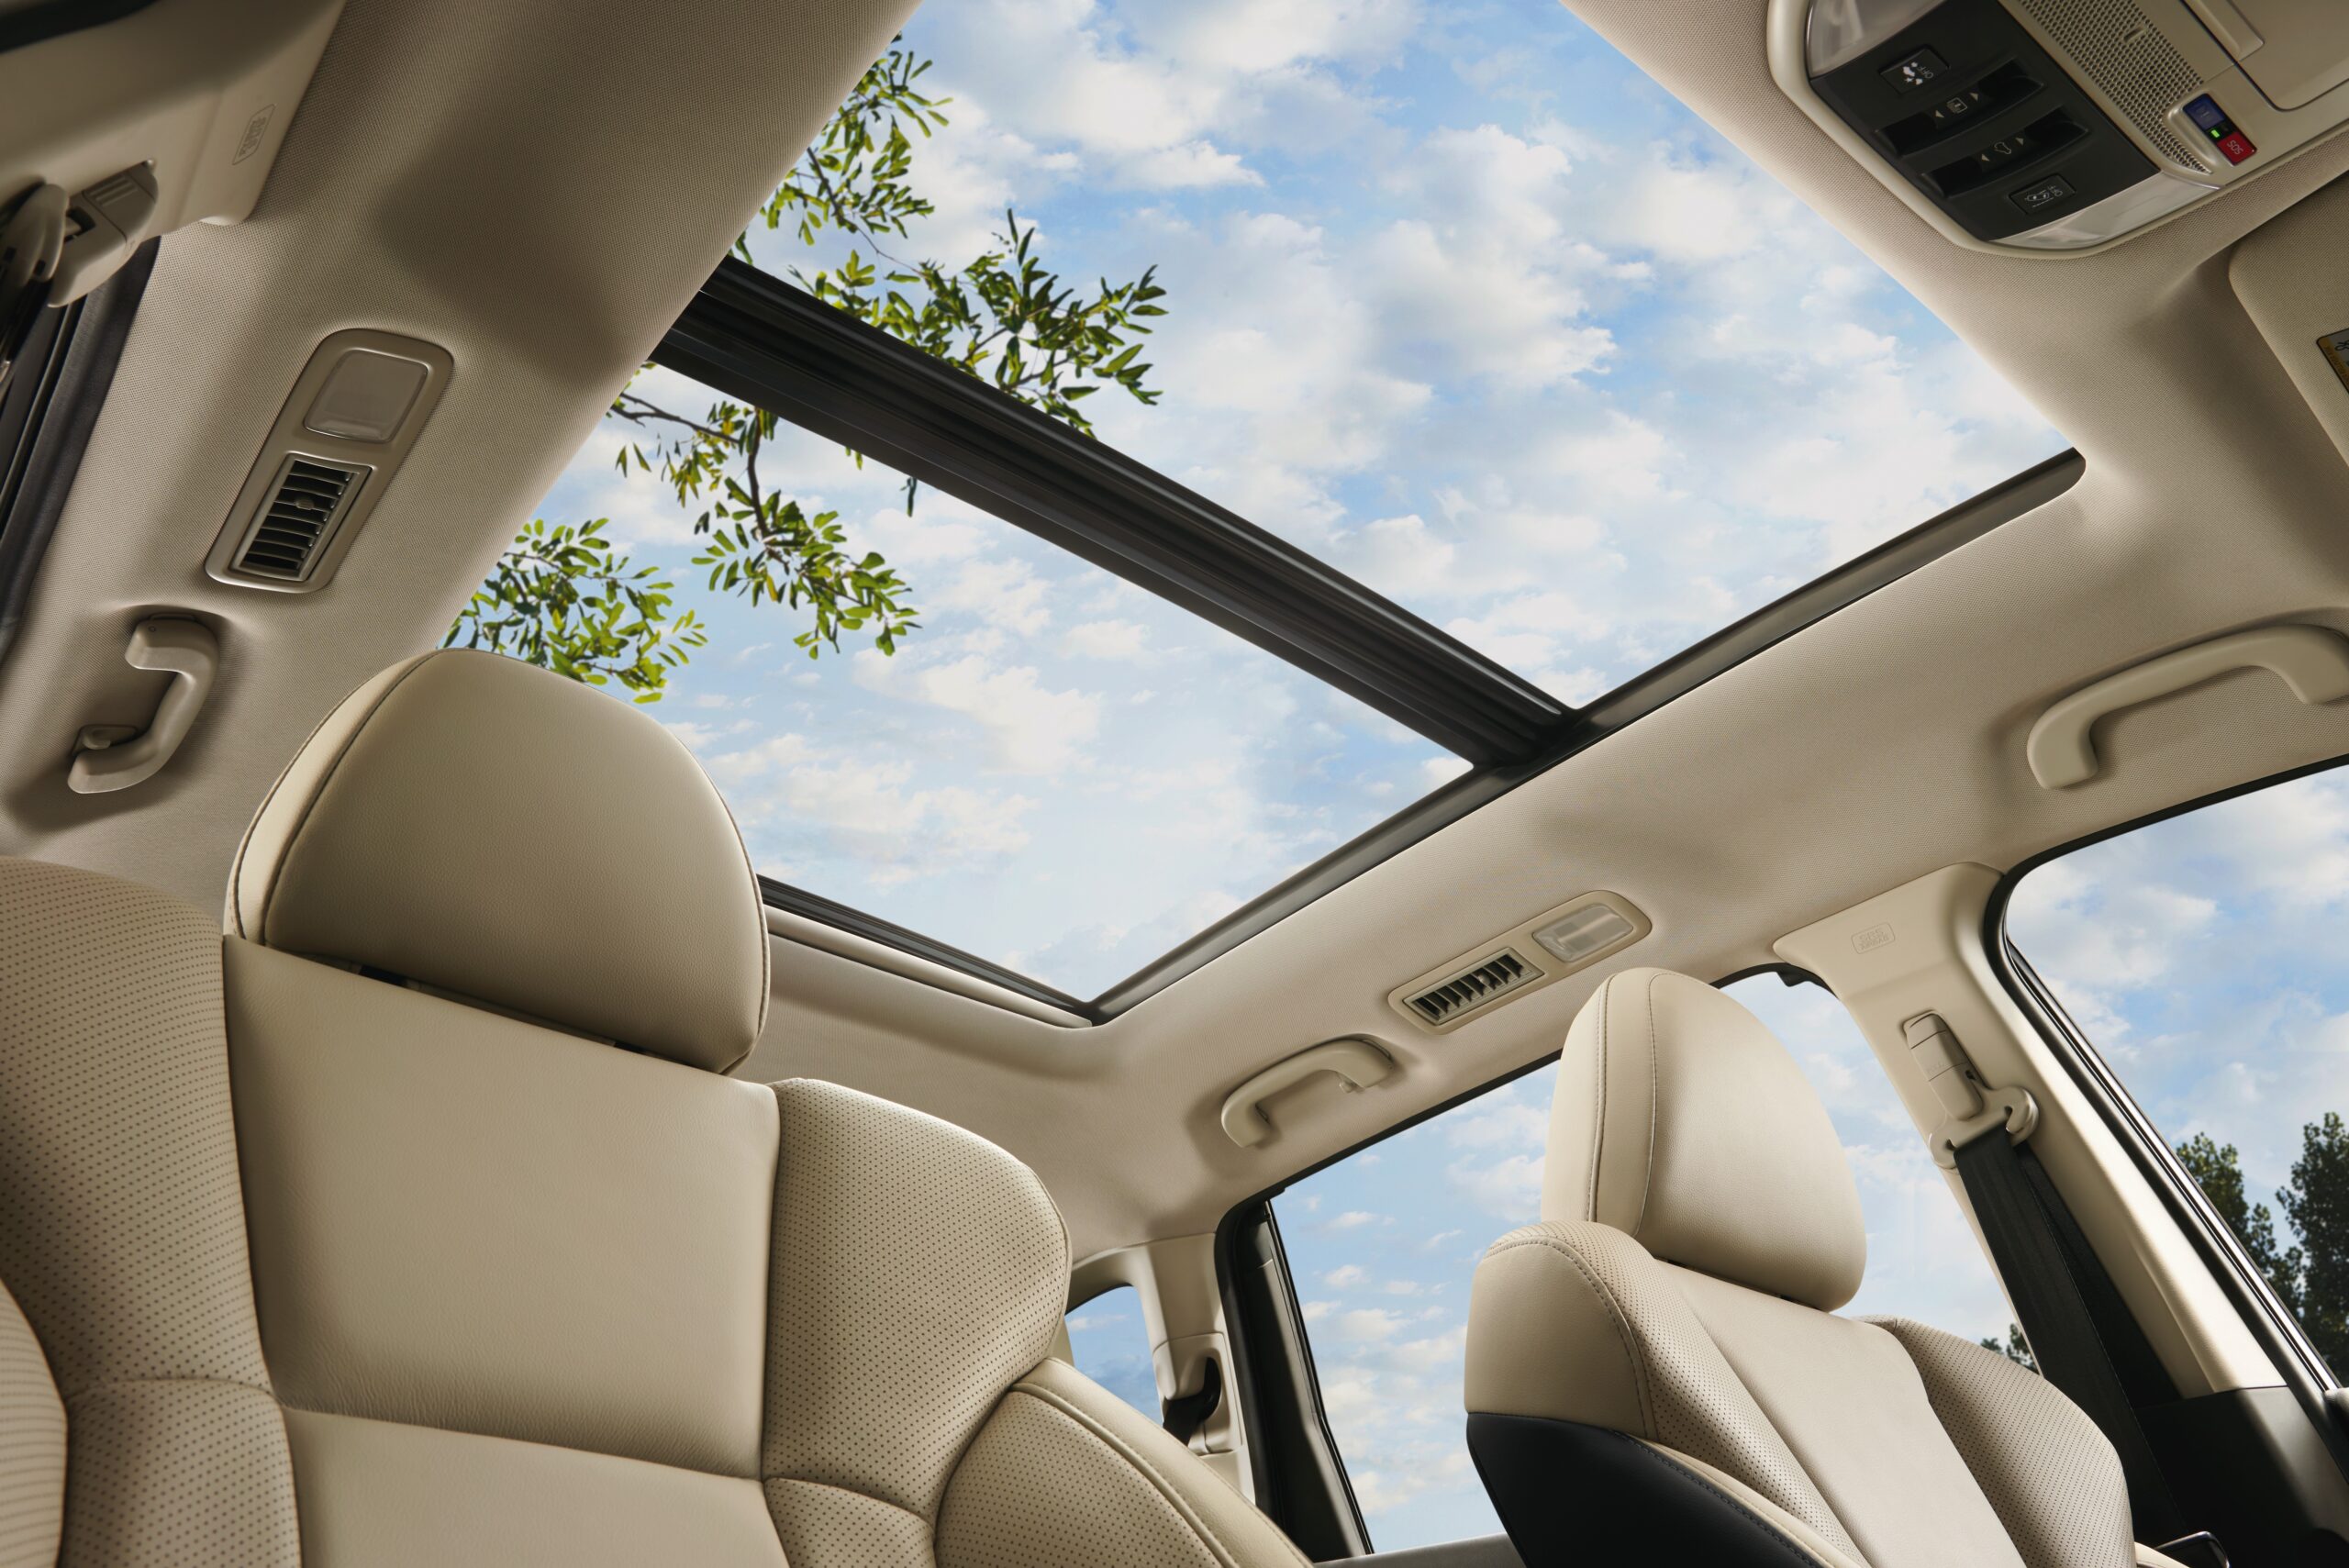 The large sunroof in the new new SUV